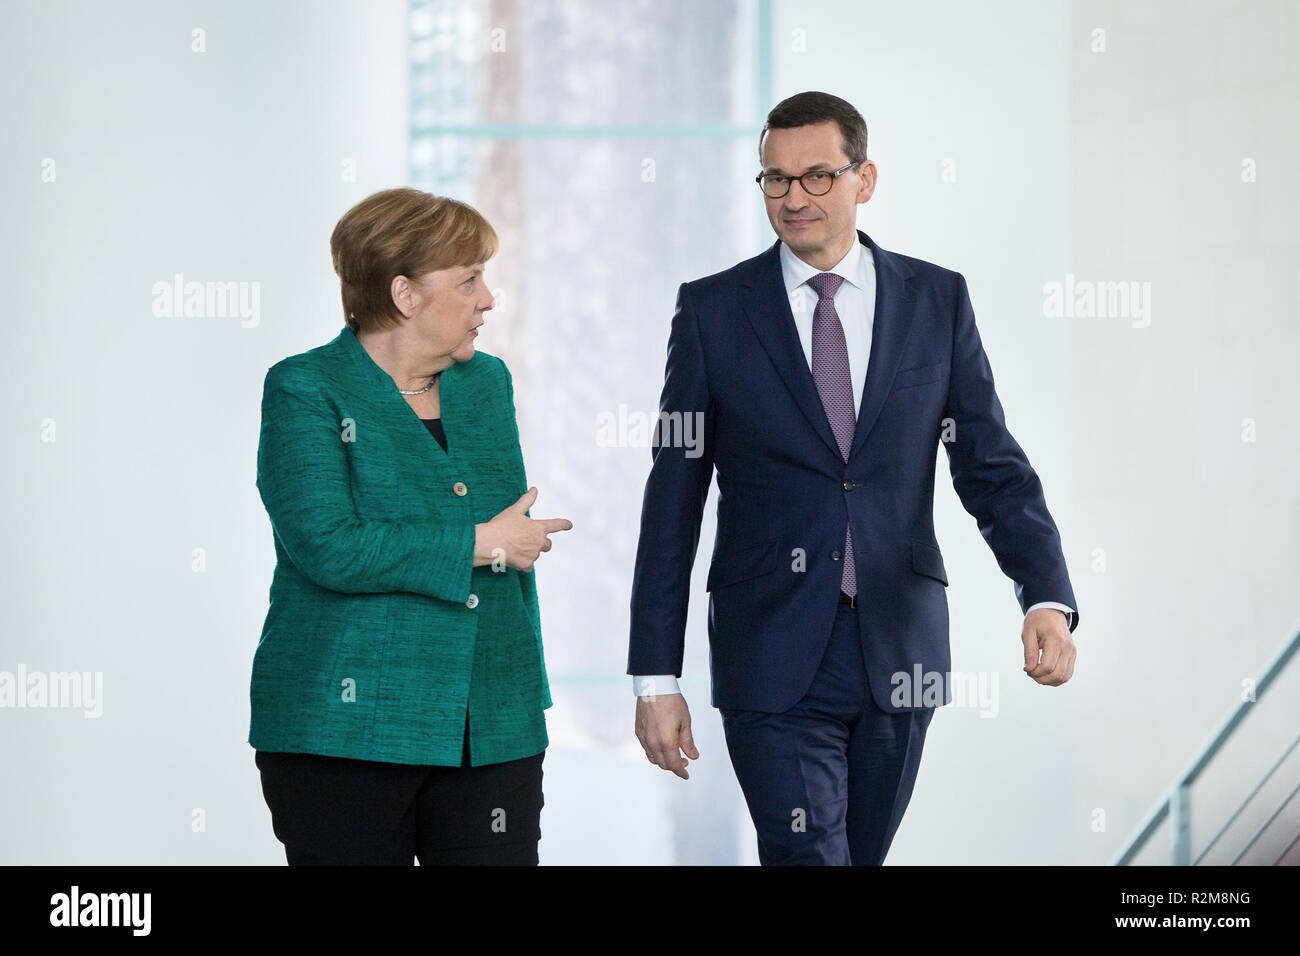 German Chancellor Angela Merkel and Polish Prime Minister Mateusz Morawiecki during a joint news conference following their meeting in Federal Chancellery in Berlin, Germany on 16 February 2018 Stock Photo